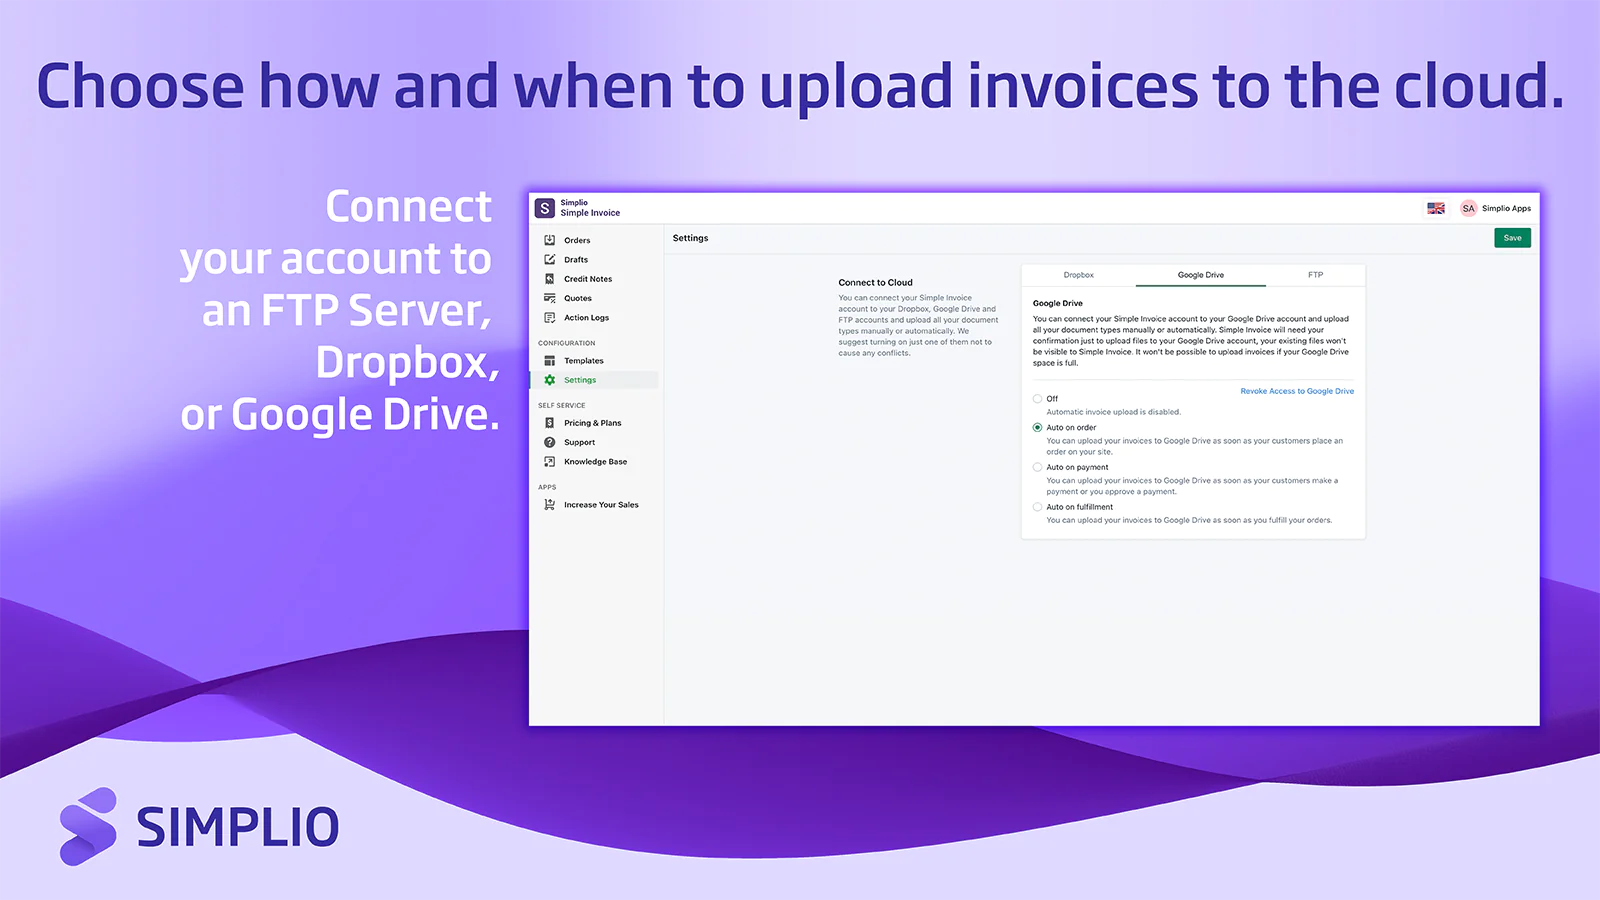 Choose how and when to upload invoices to the cloud.